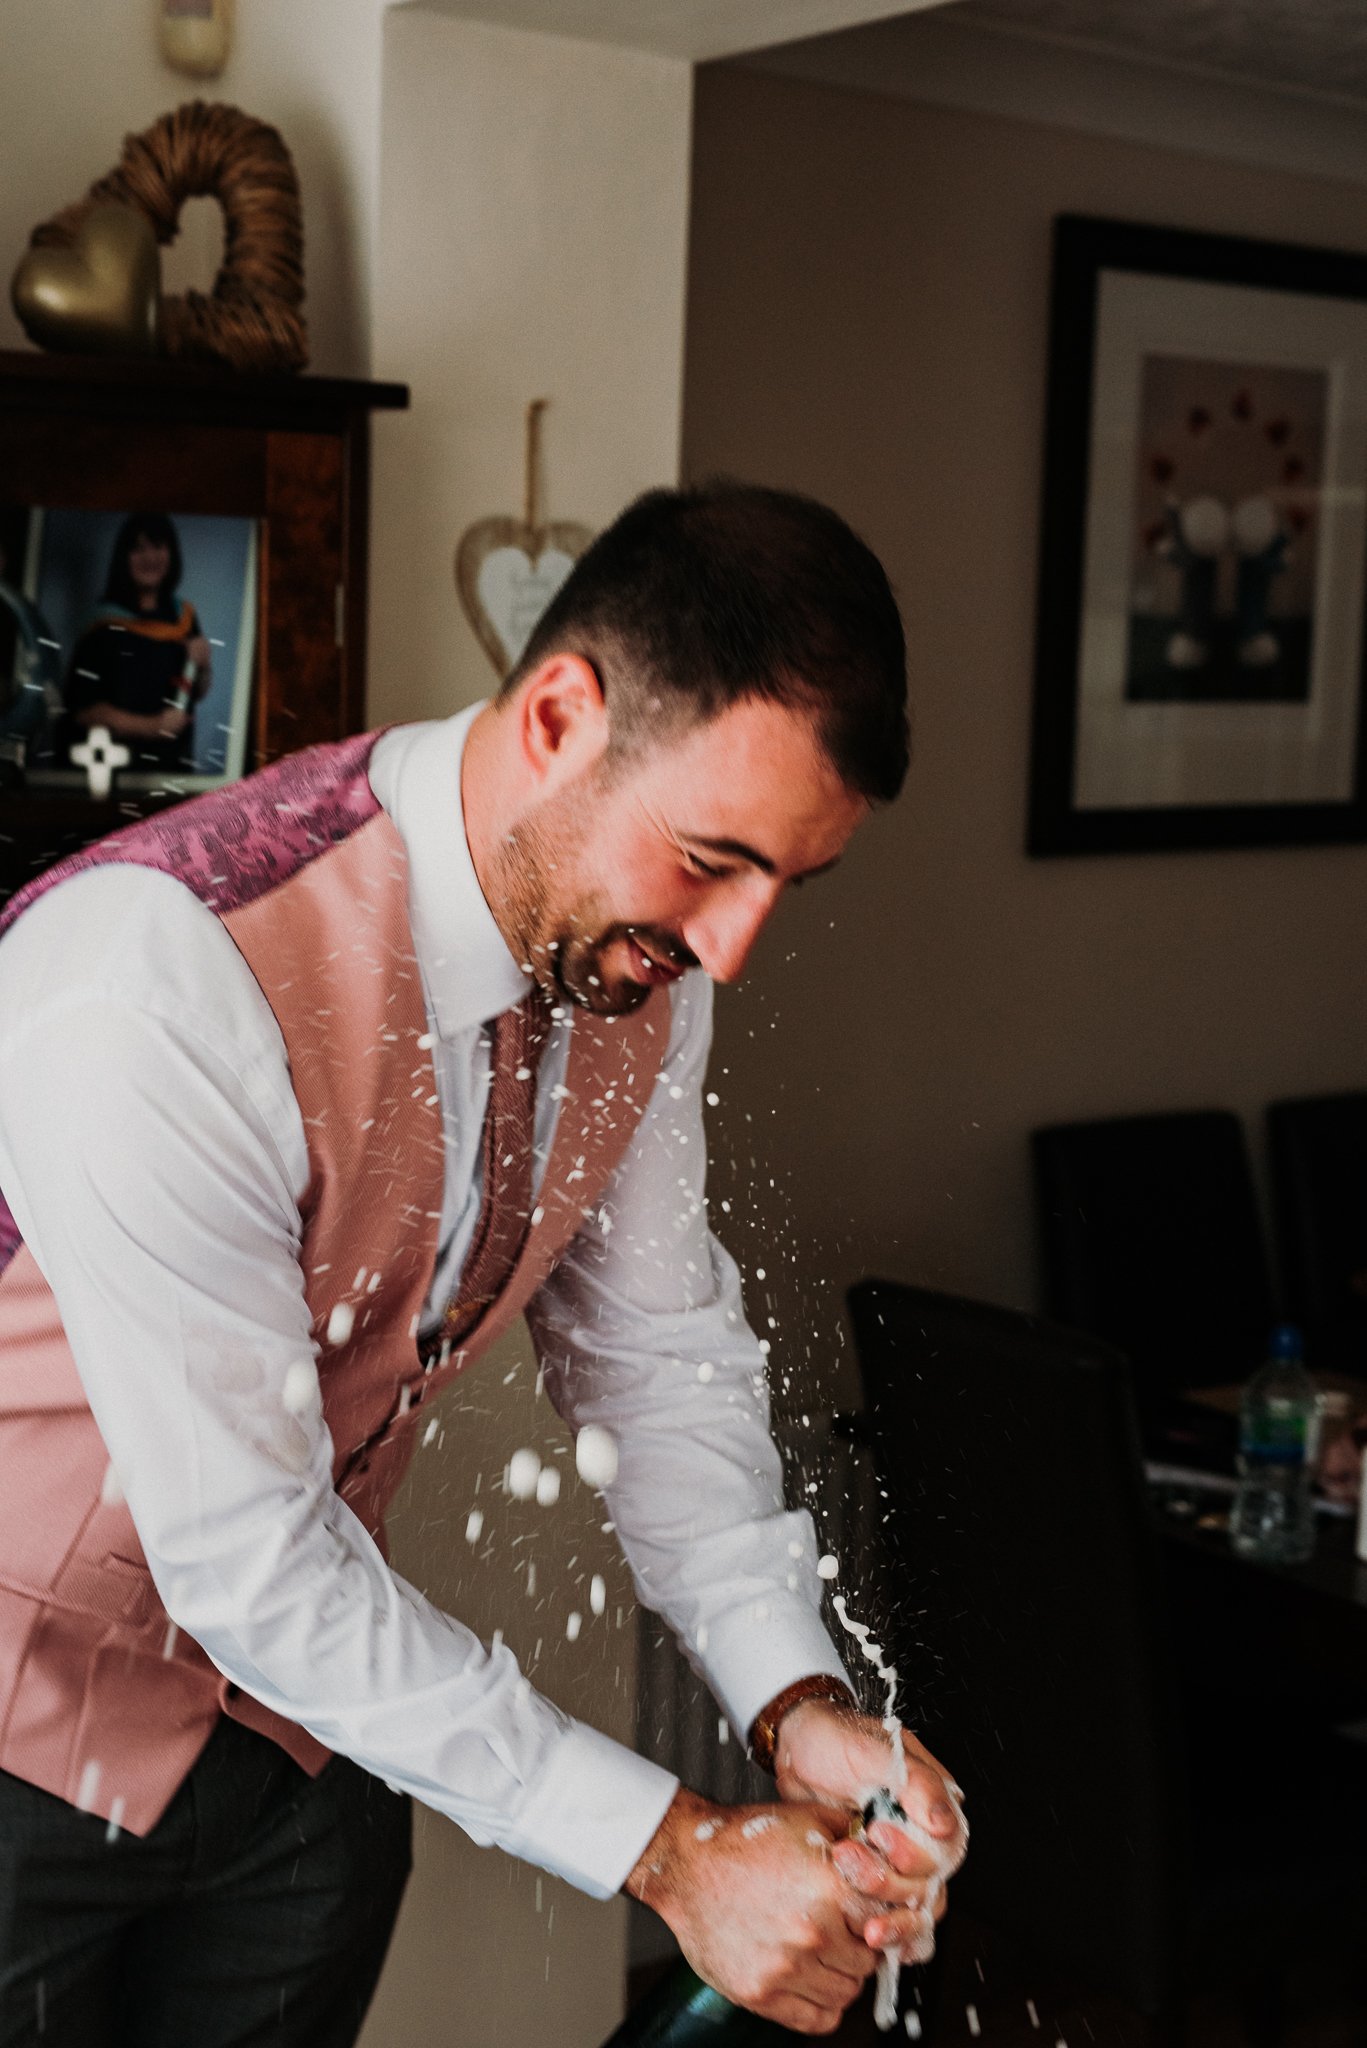 The groom makes a mess of his mum's kitchen when the champagne explodes as he pops the cork.